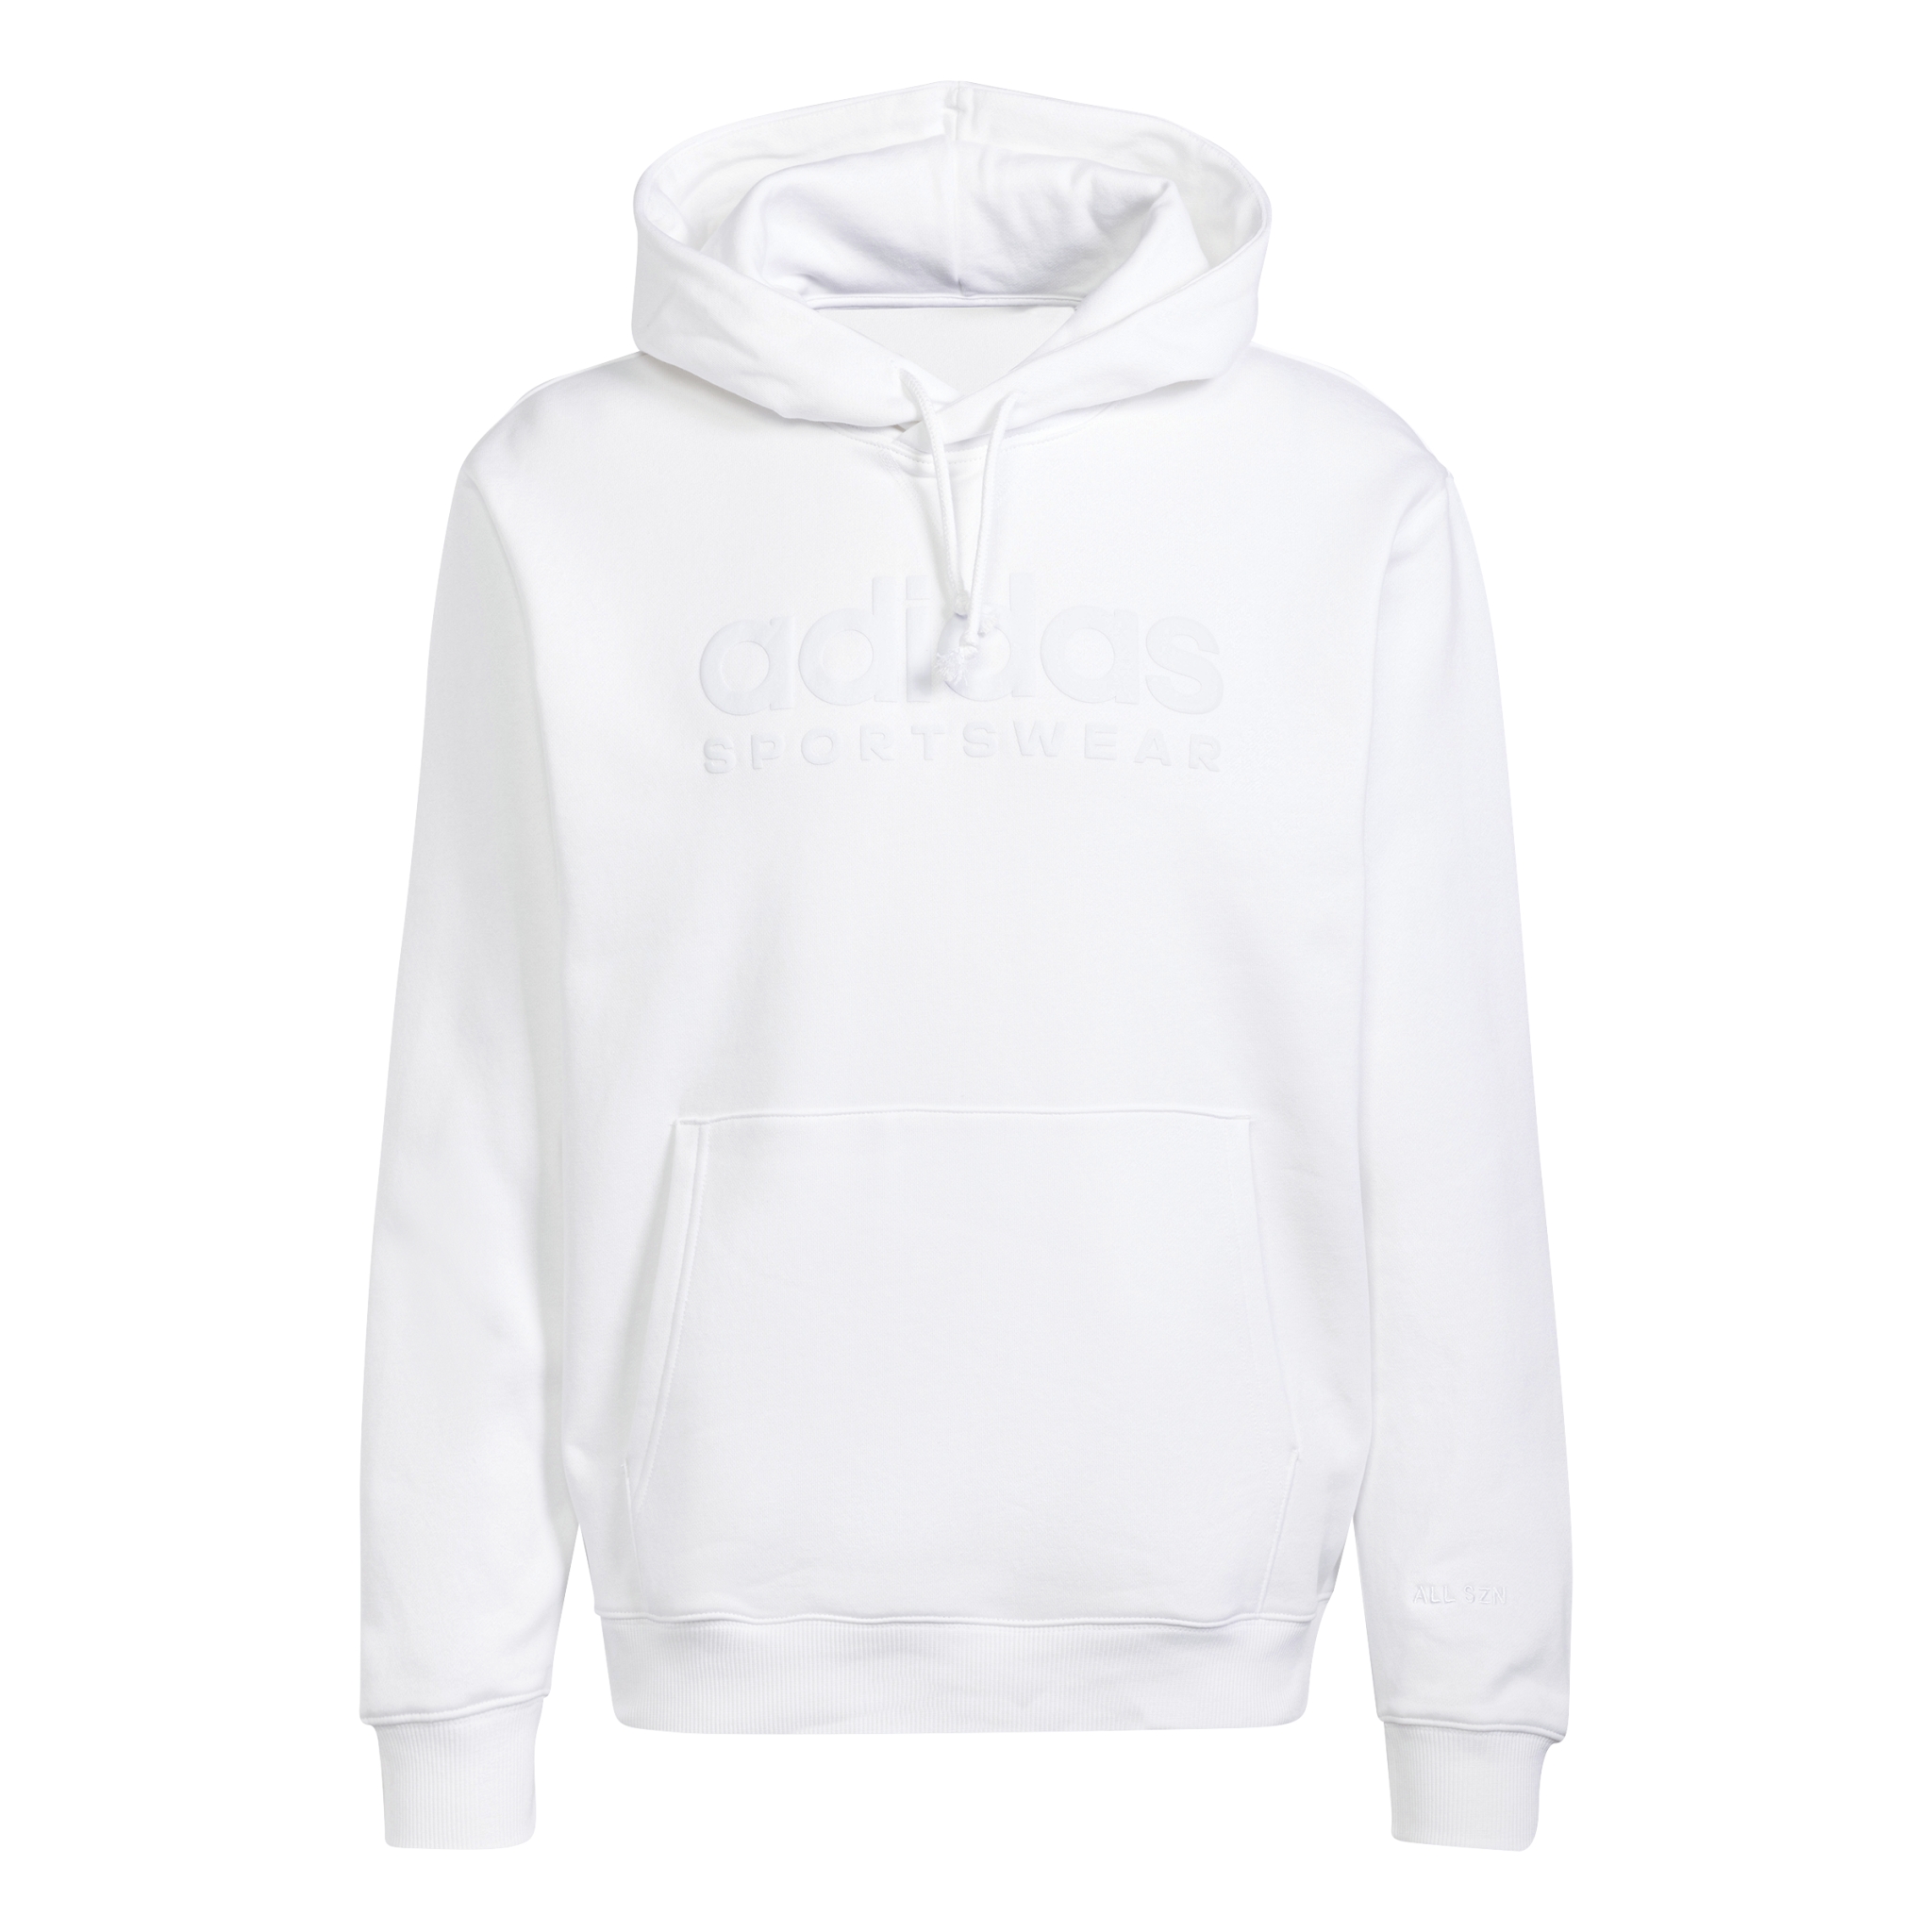 ADIDAS ALL SZN Graphic Hoodie 10737844